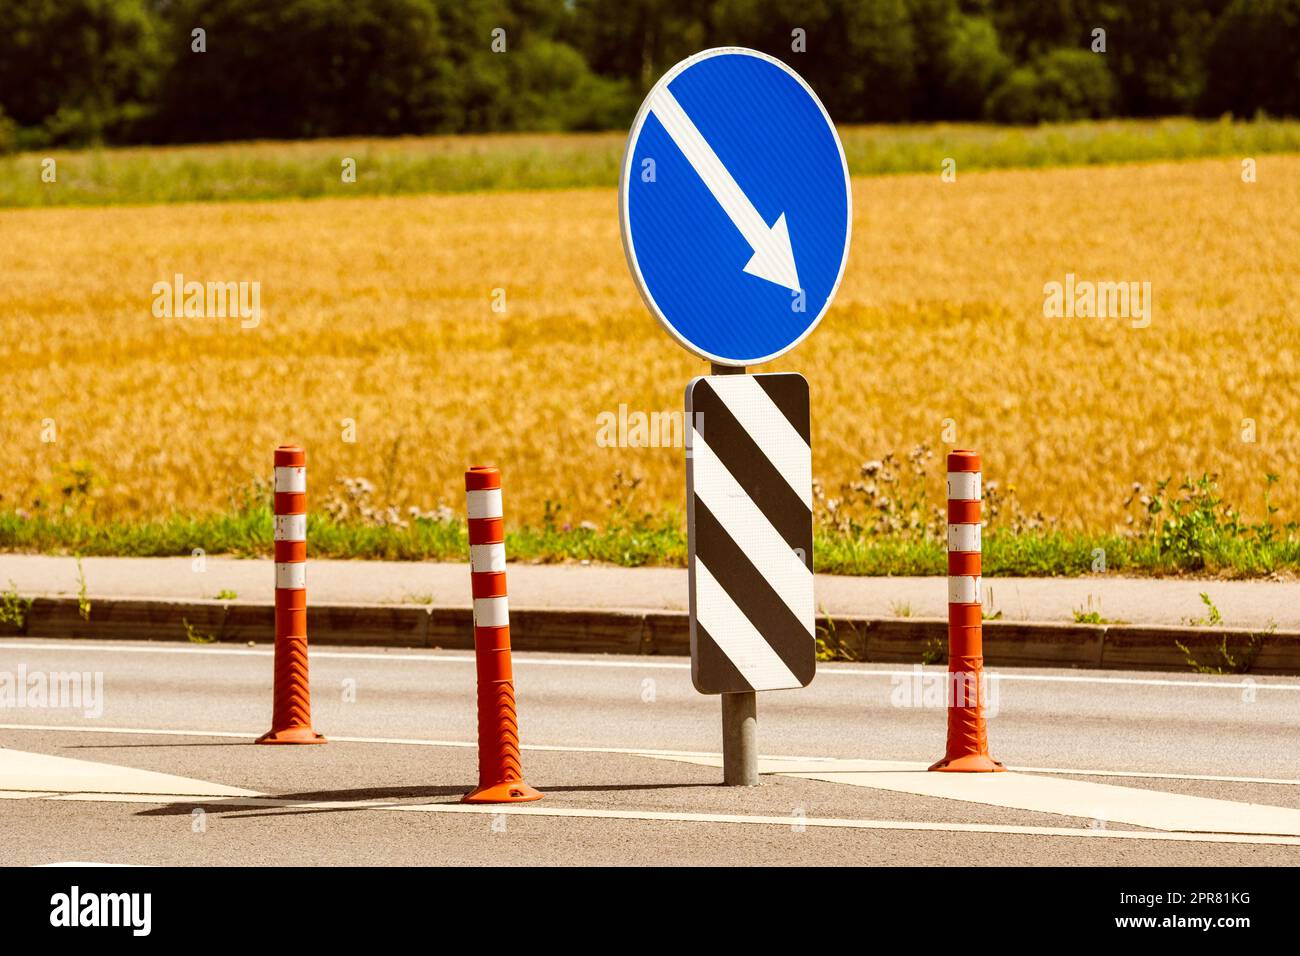 Orange cones and road signs for traffic control Stock Photo